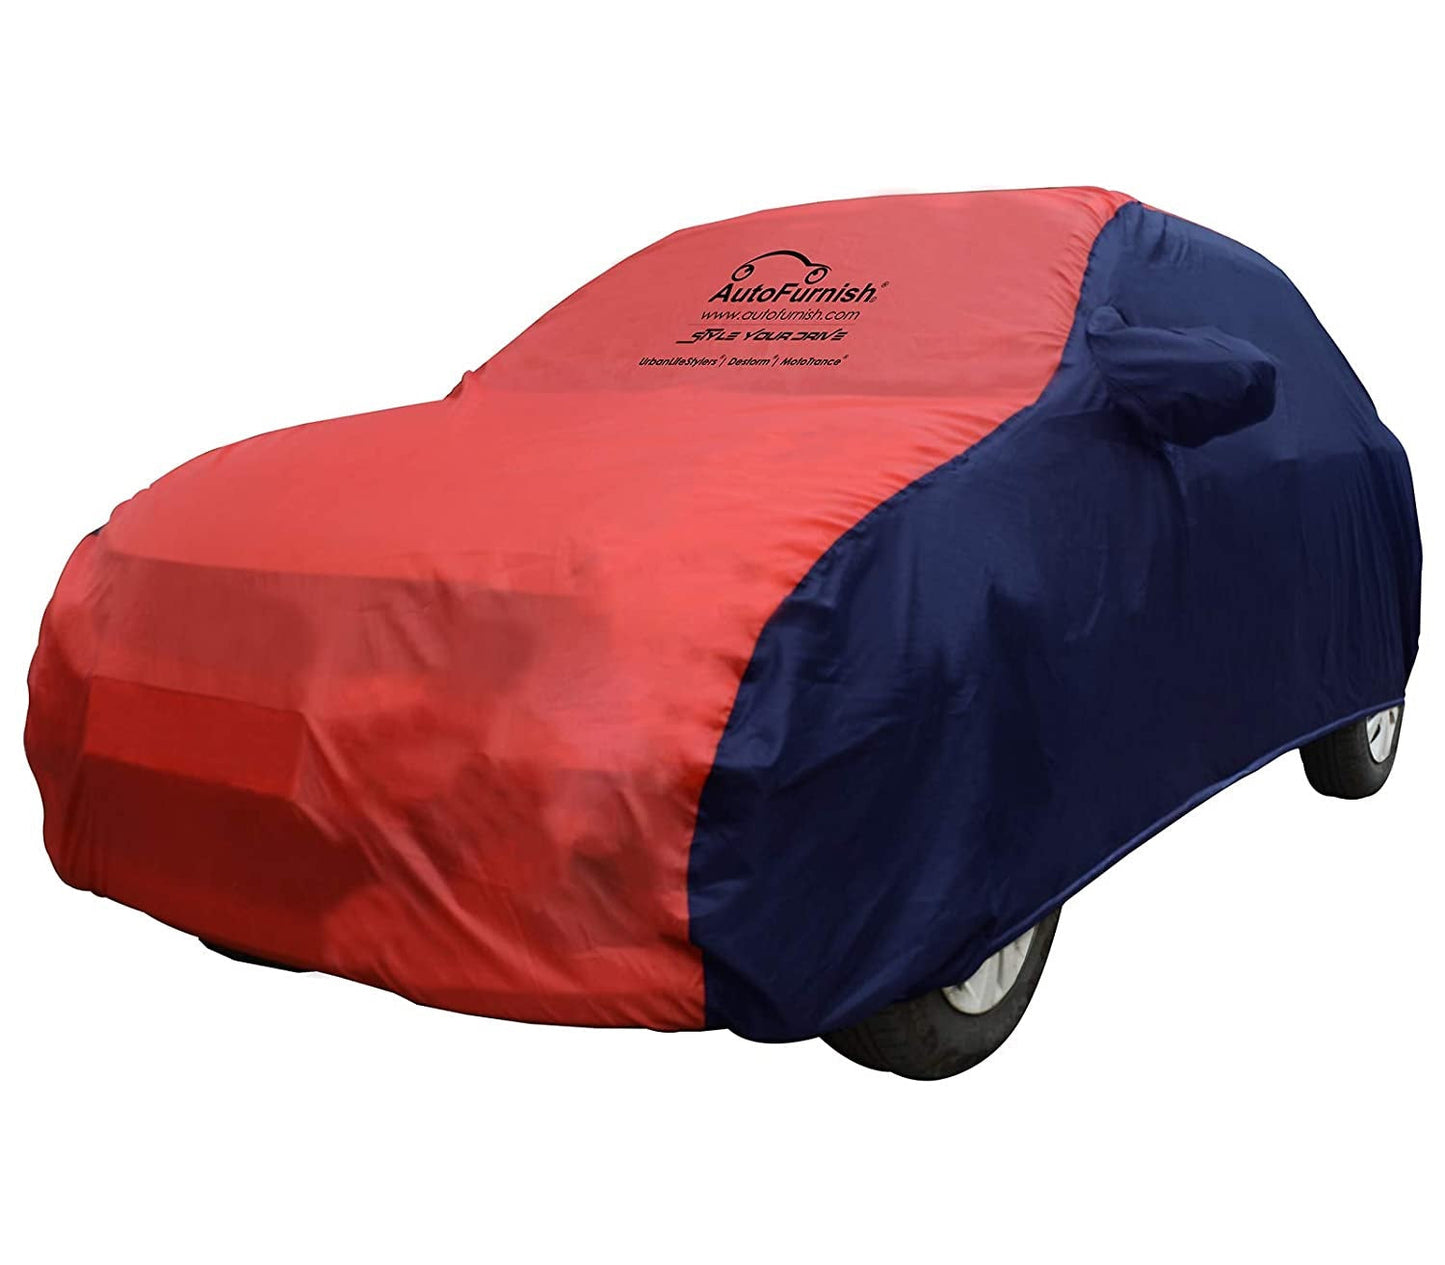 Audi Q8 (2020) Car Body Cover, Triple Stitched, Heat & Water Resistant with Side Mirror Pockets (SPORTY Series)